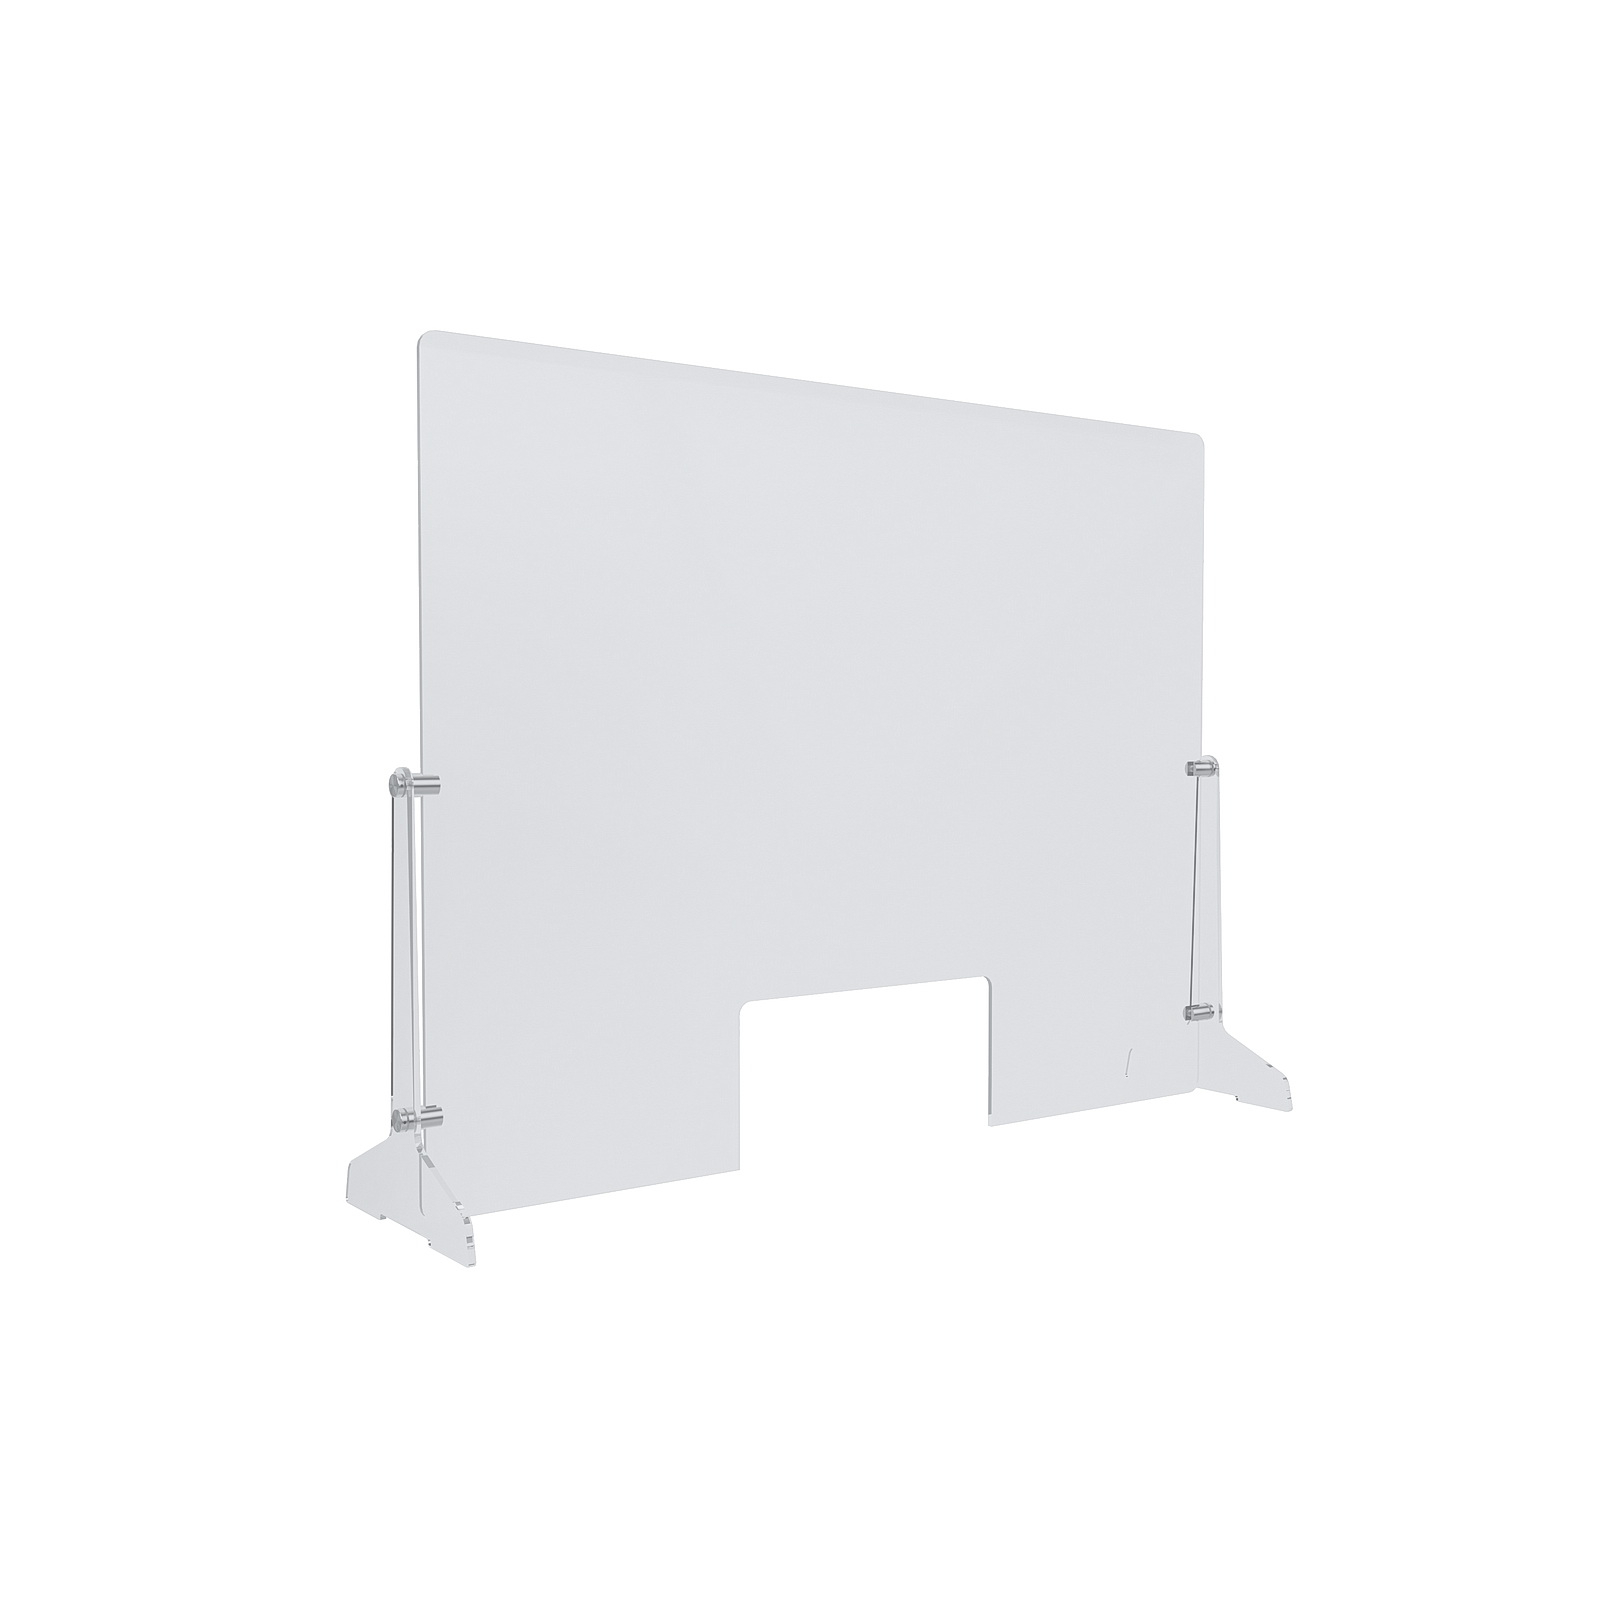 Clear Acrylic Sneeze Guard 30'' Wide x 23-1/2'' Tall (10'' x 5'' Cut Out), with (2) 7'' Wide x 12-5/16'' Deep Feet on the Side, and (4) Aluminum Clear Anodized Forks / Standoffs..